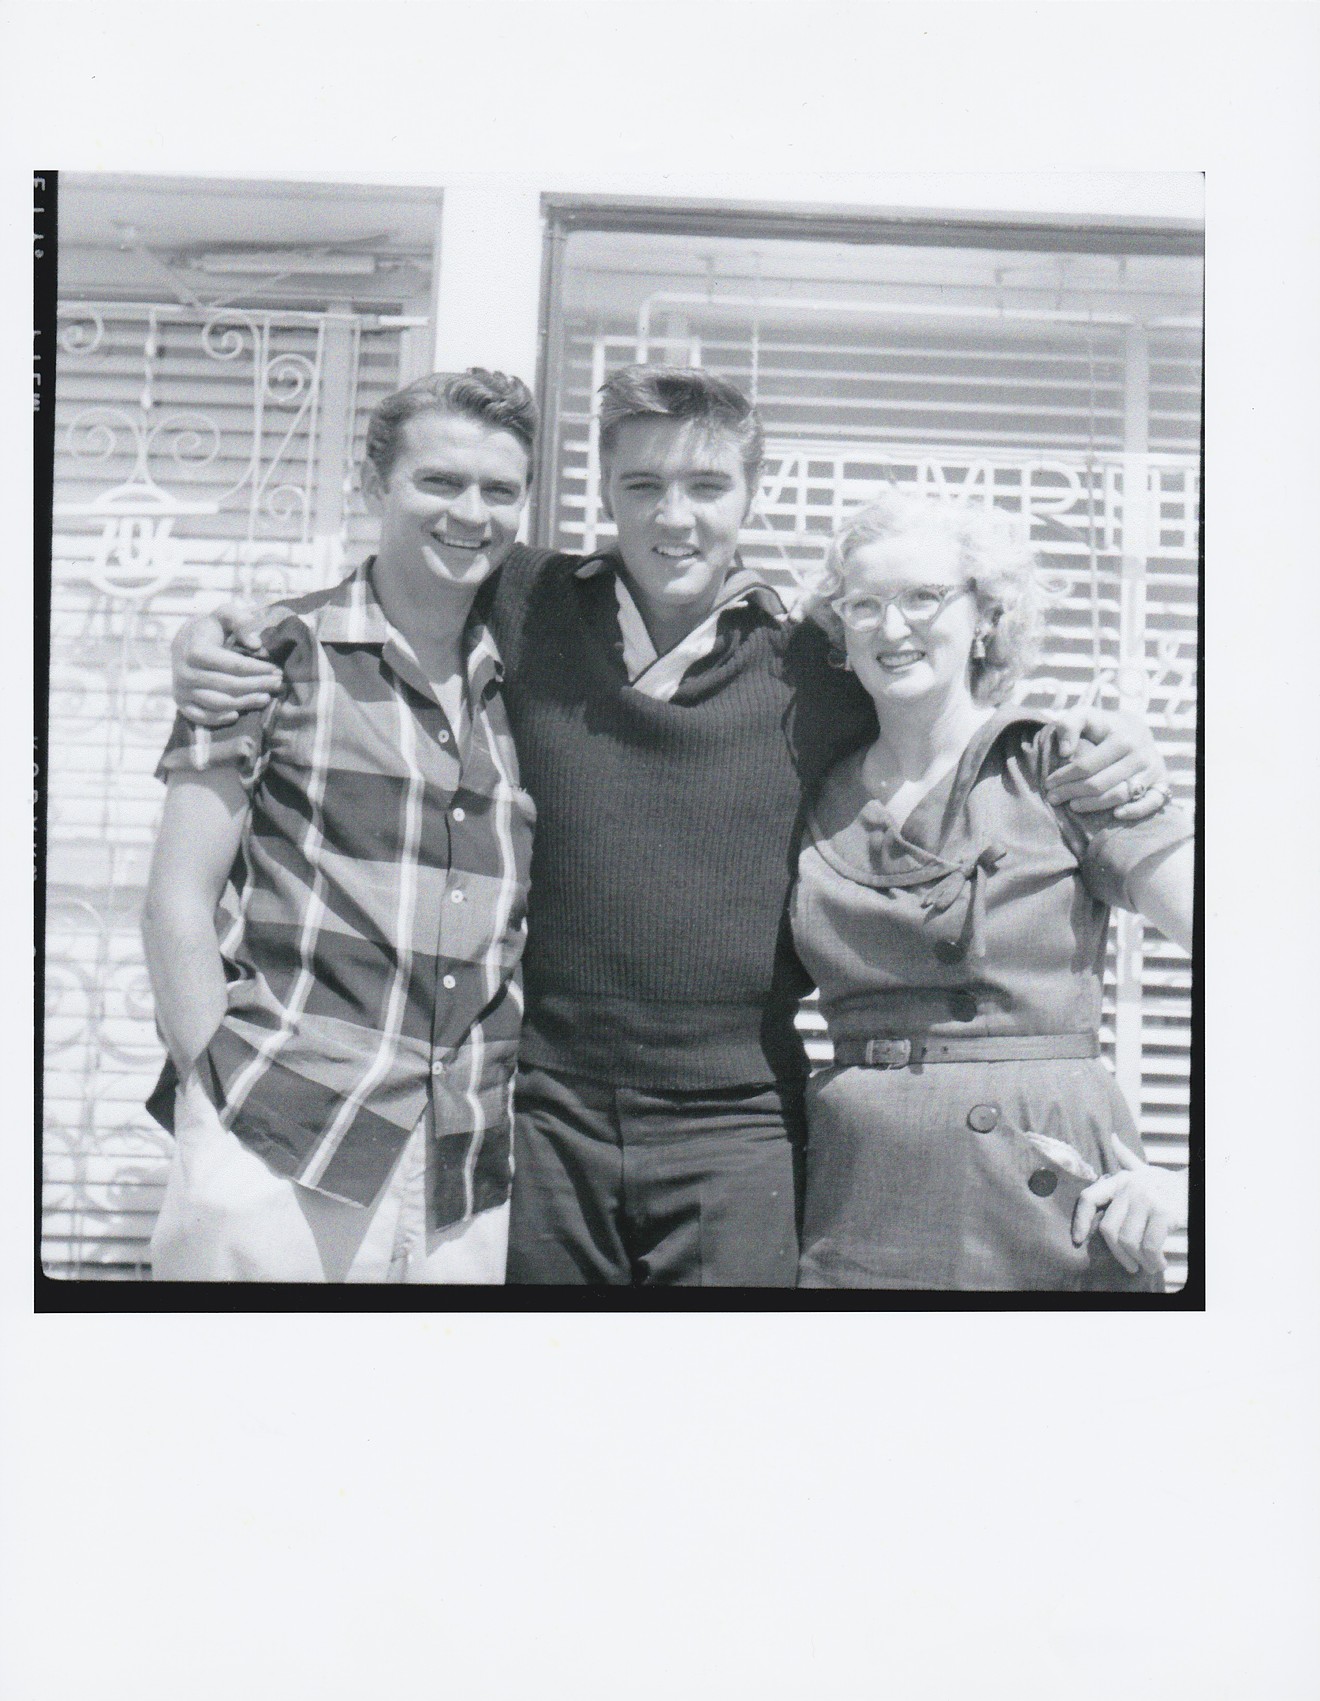 Sun Records owner Sam Phillips, Elvis Presley and Sun office manager Marion Keisker standing outside Sun at 706 Union, Memphis.